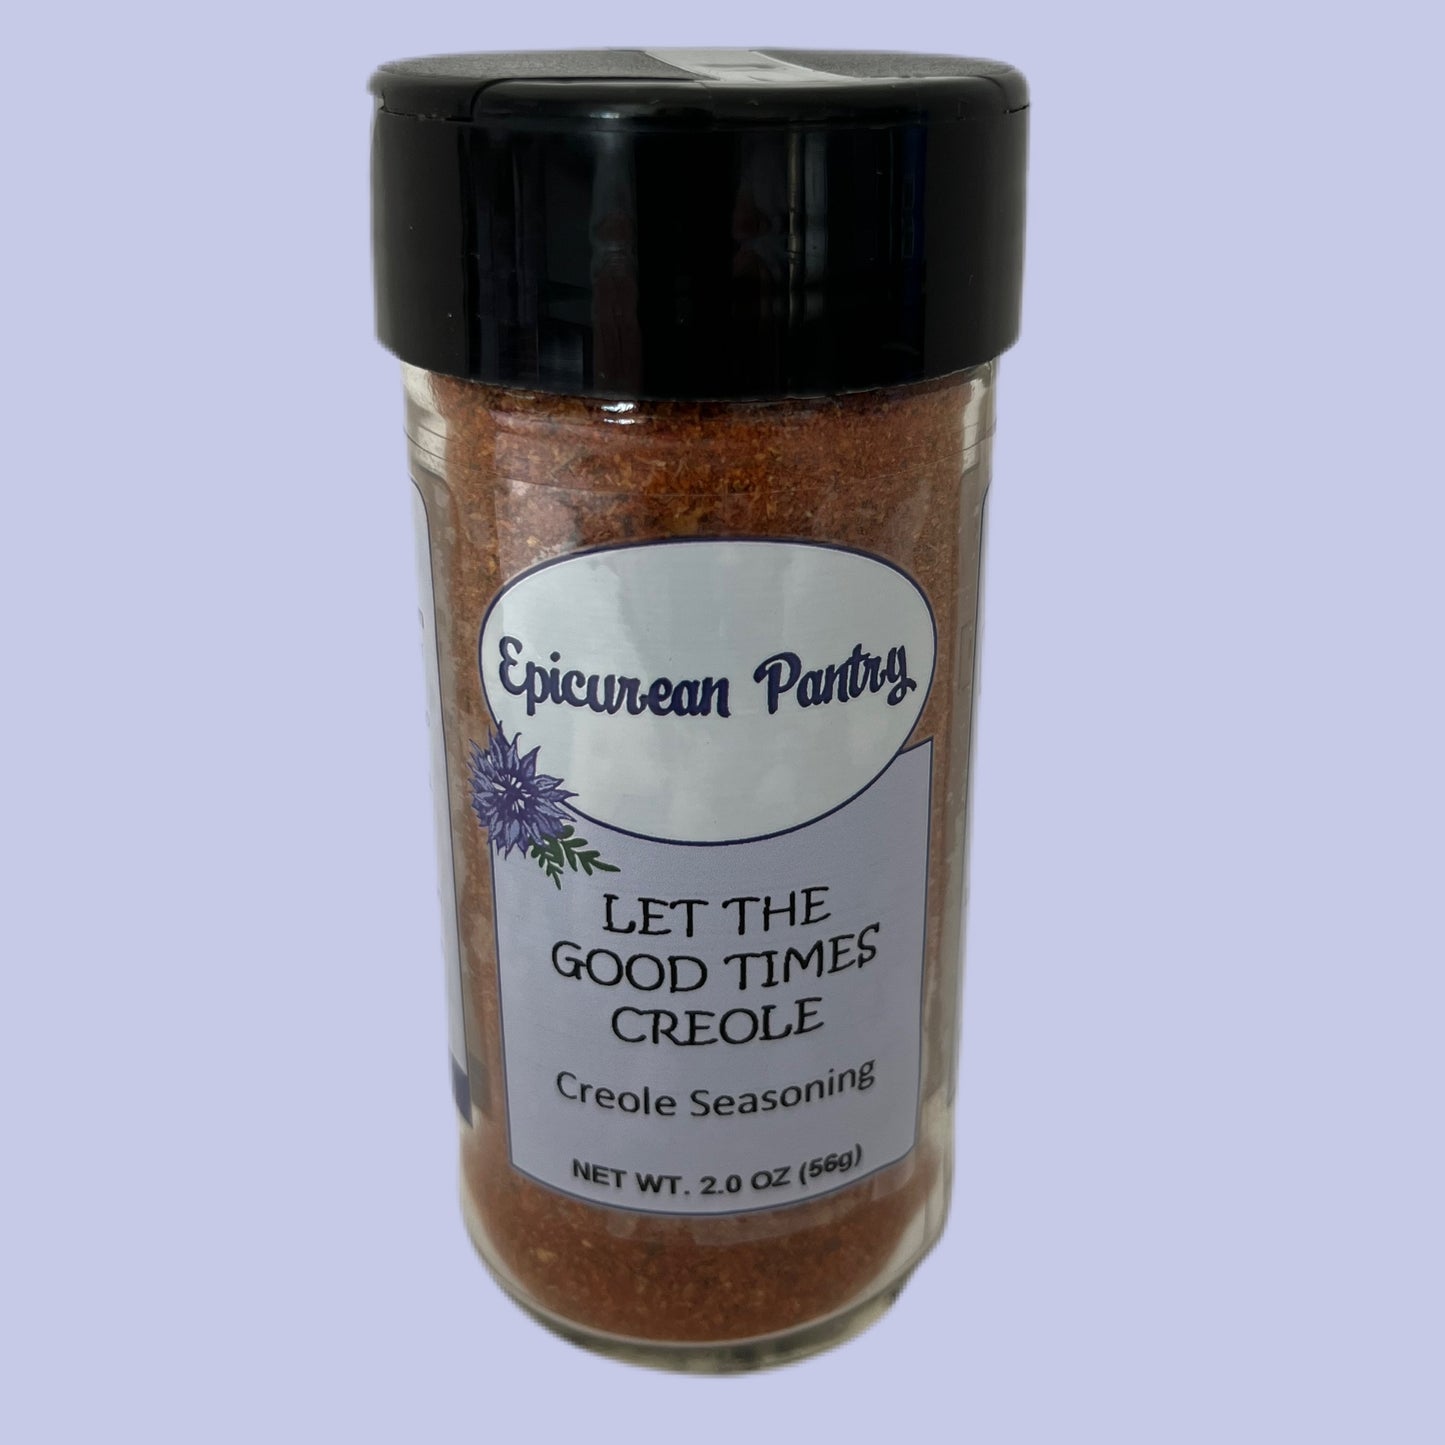 Let the Good Times Creole - Creole Seasoning 2.0 oz. net wt.